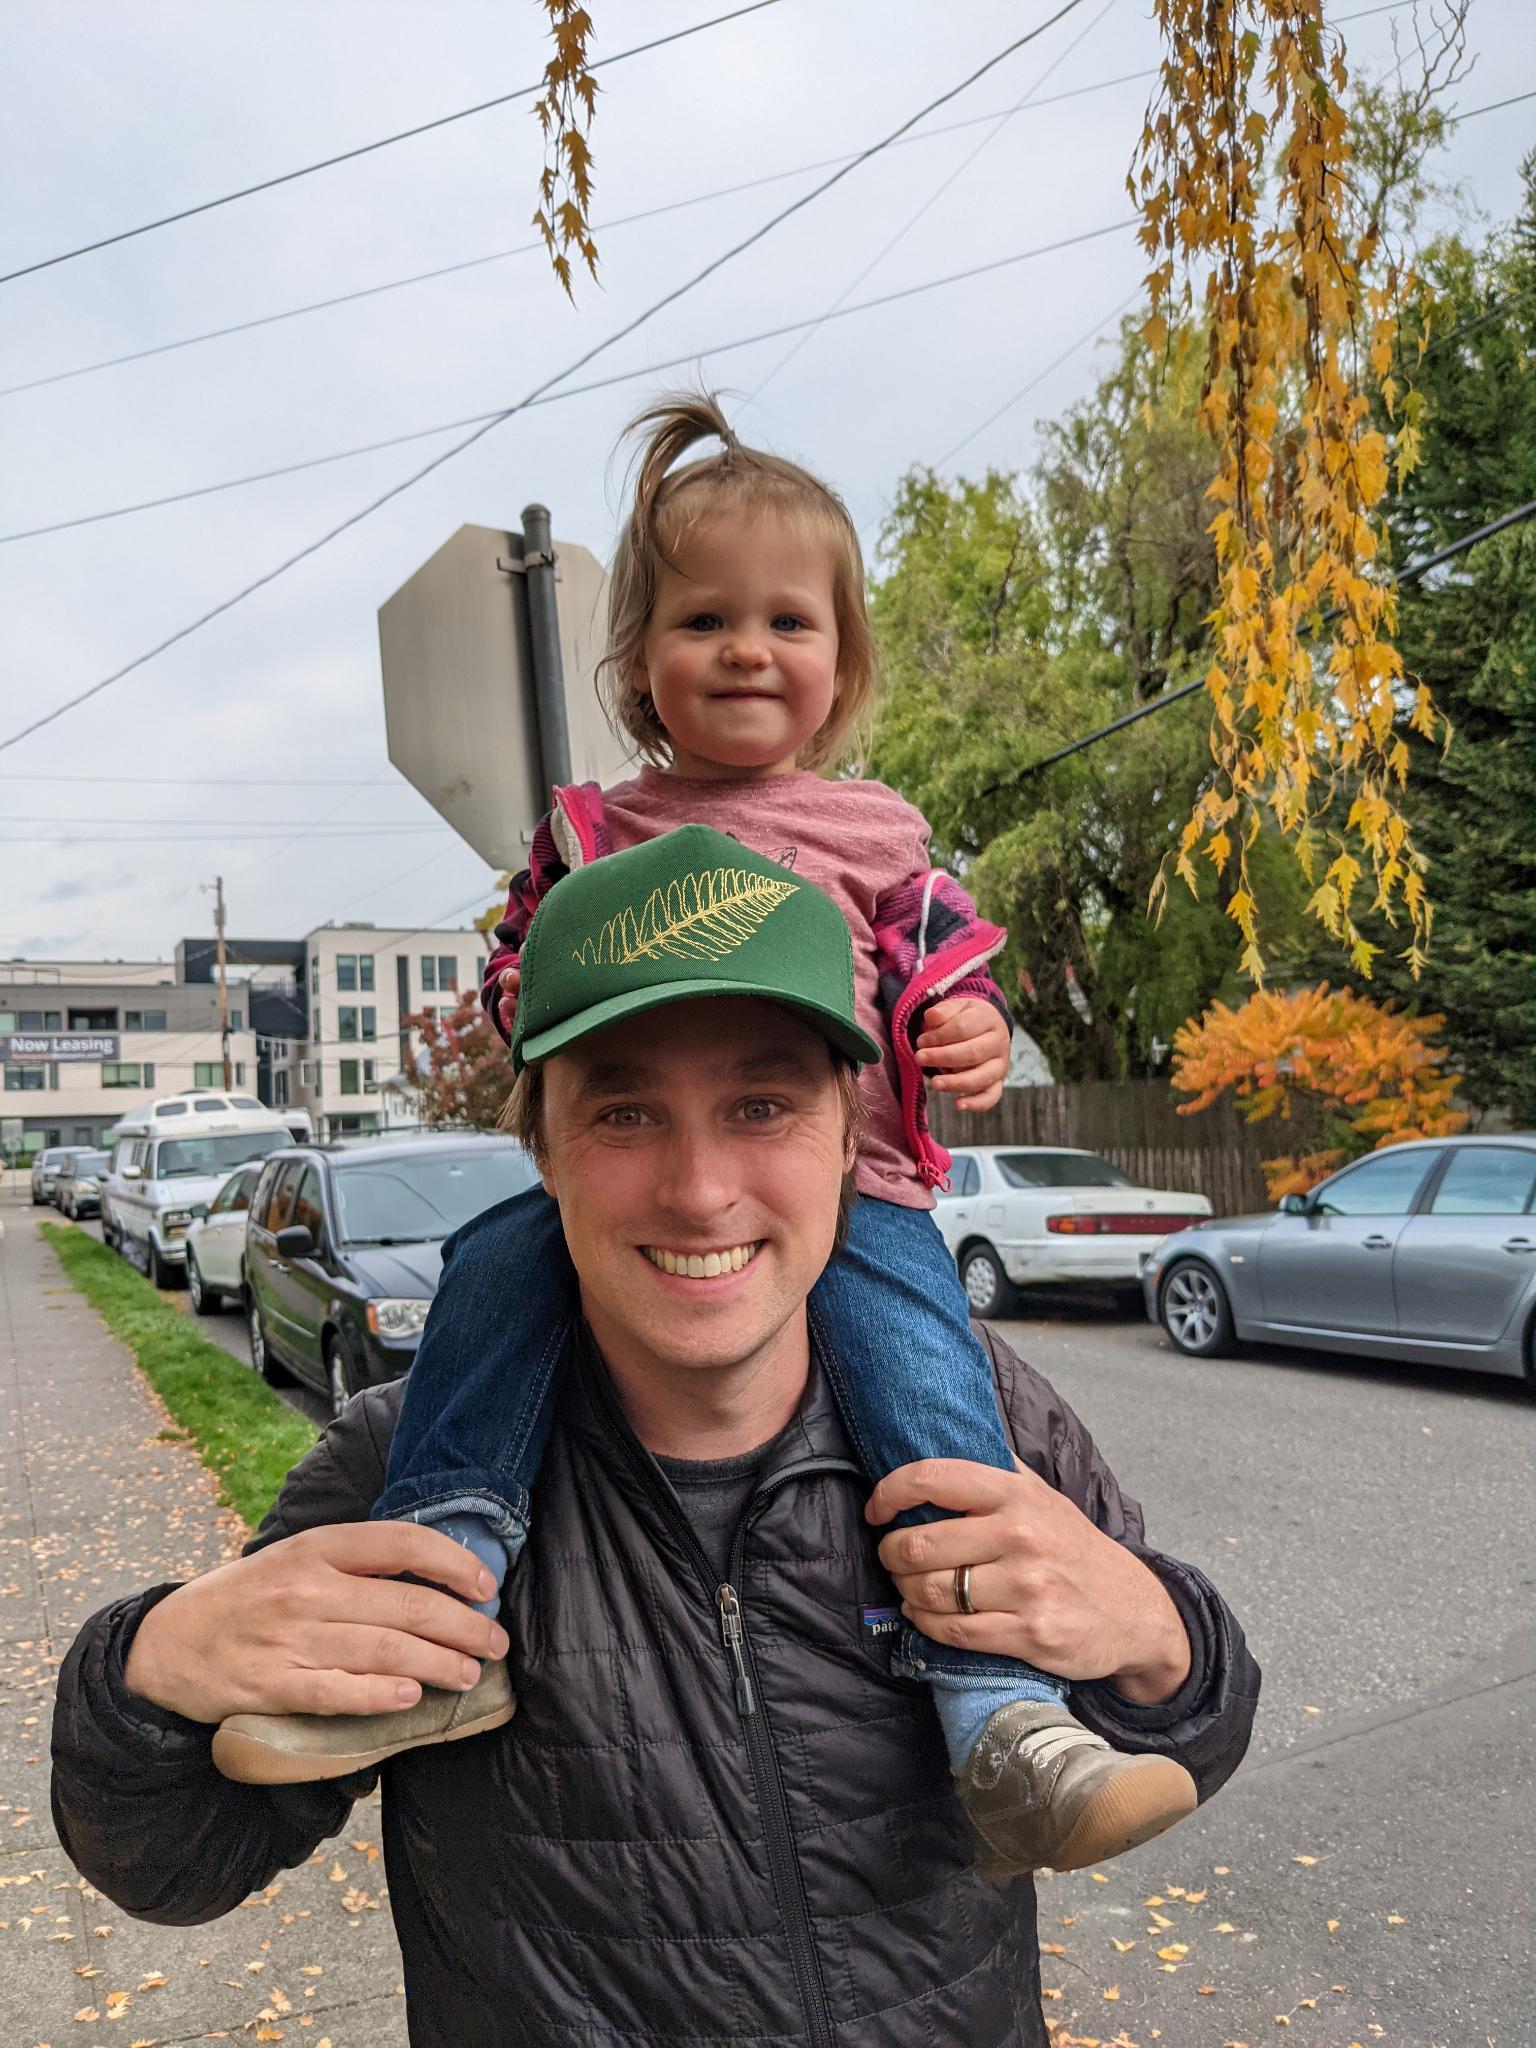 Craig Hill with his daughter Eleanor on his shoulders in a Portland neighborhood